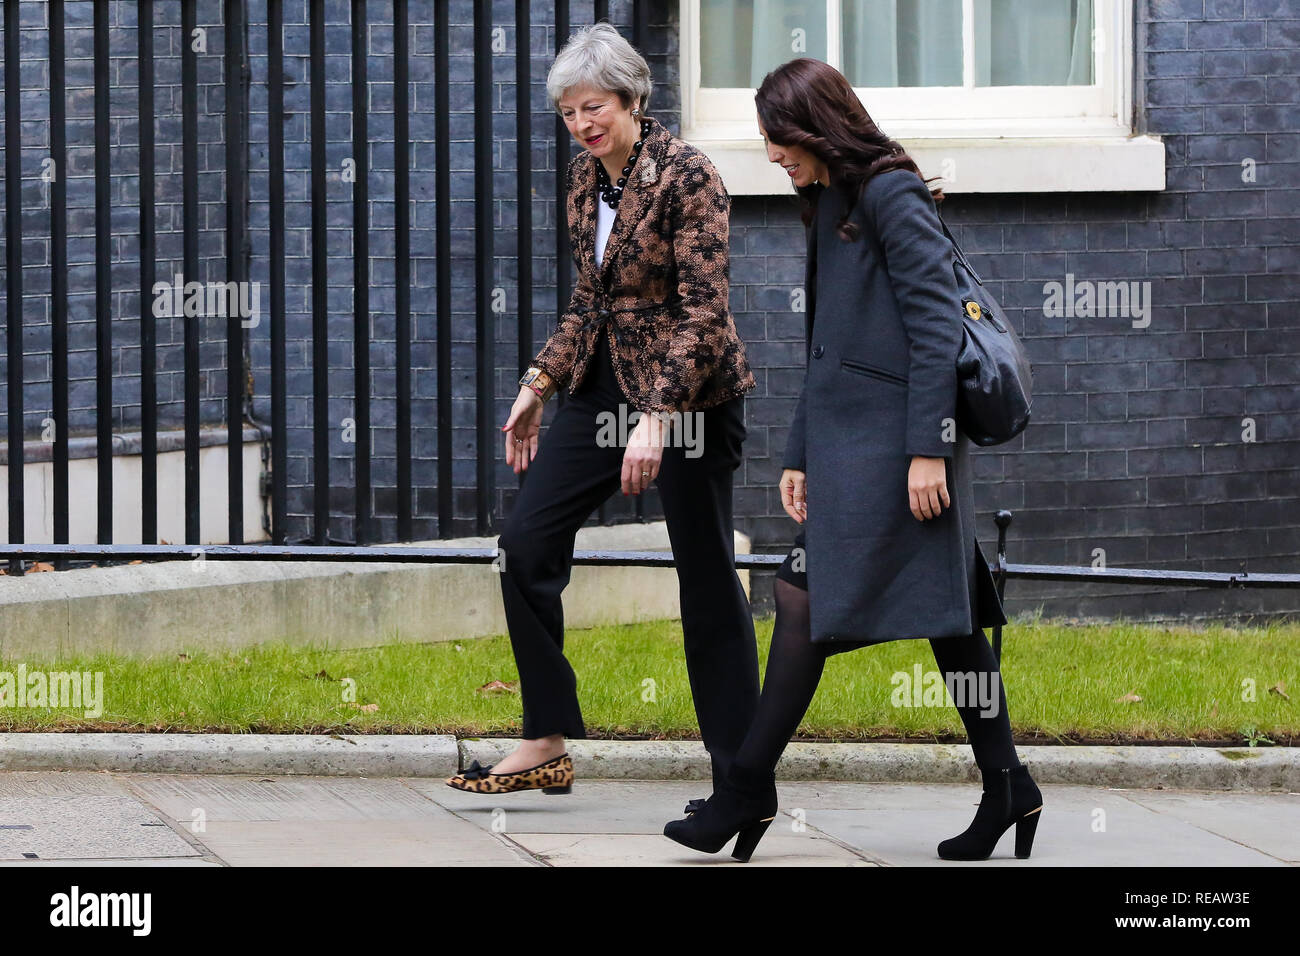 Downing Street. London, UK 21 Jan 2019 - British Prime Minister Theresa May welcomes the New Zealand Prime Minister Jacinda Ardern in Downing Street.   Credit: Dinendra Haria/Alamy Live News Stock Photo